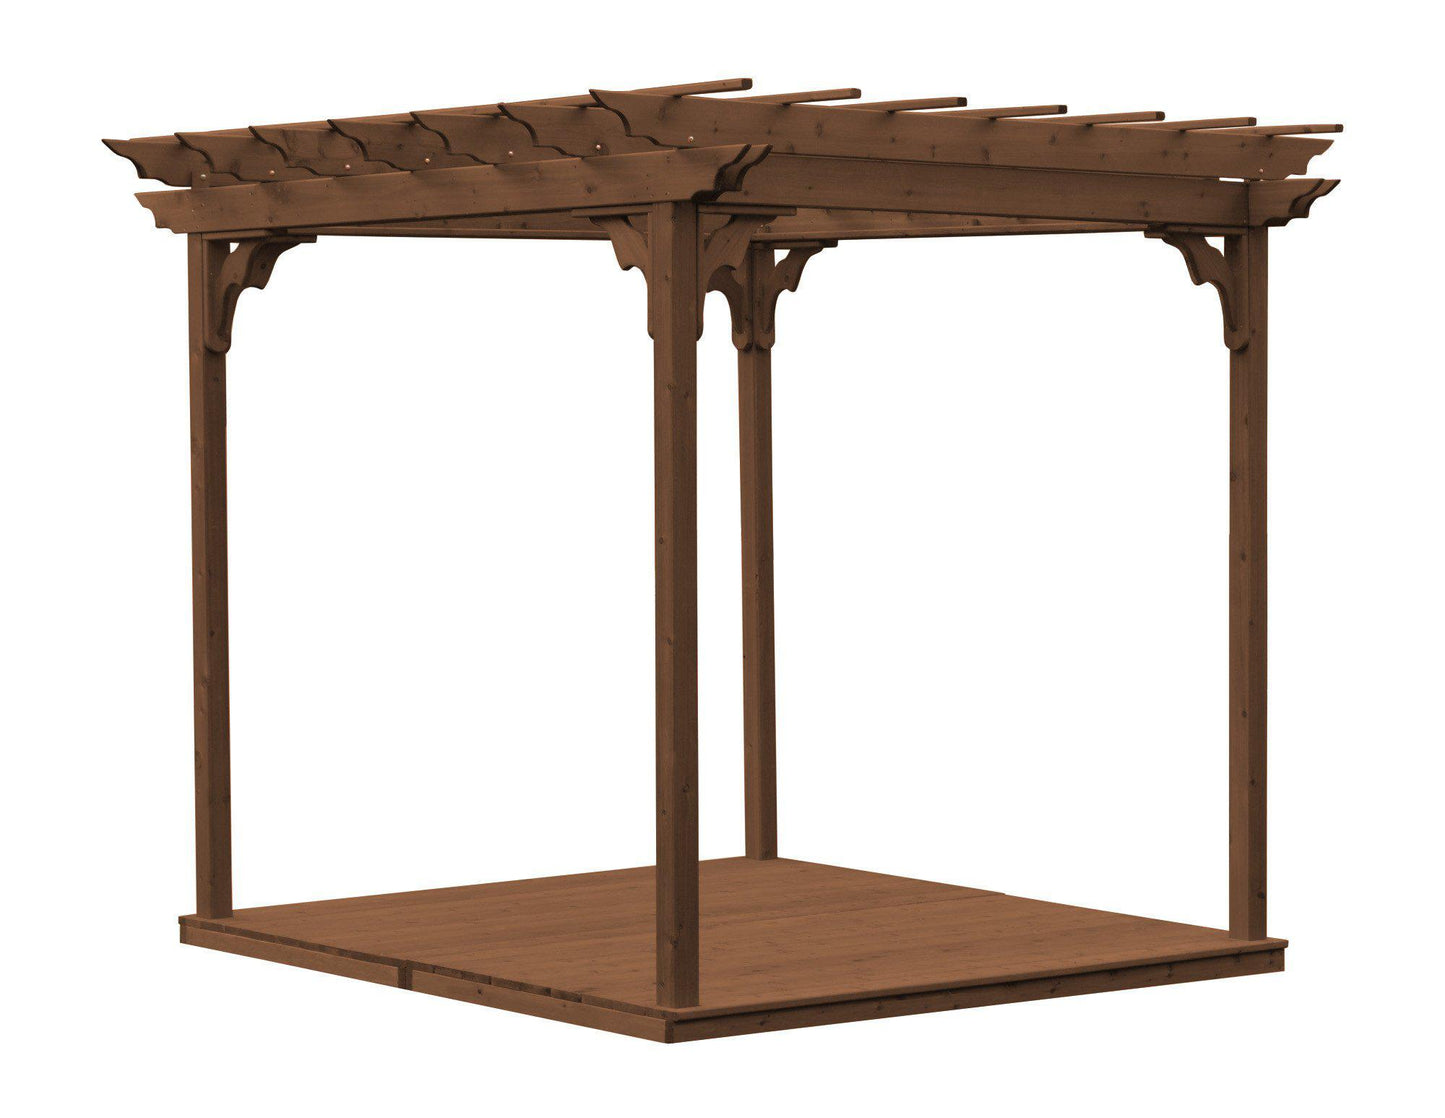 A&L FURNITURE CO. Western Red Cedar 8'x8' Pergola w/Deck & Swing Hangers - LEAD TIME TO SHIP 4 WEEKS OR LESS